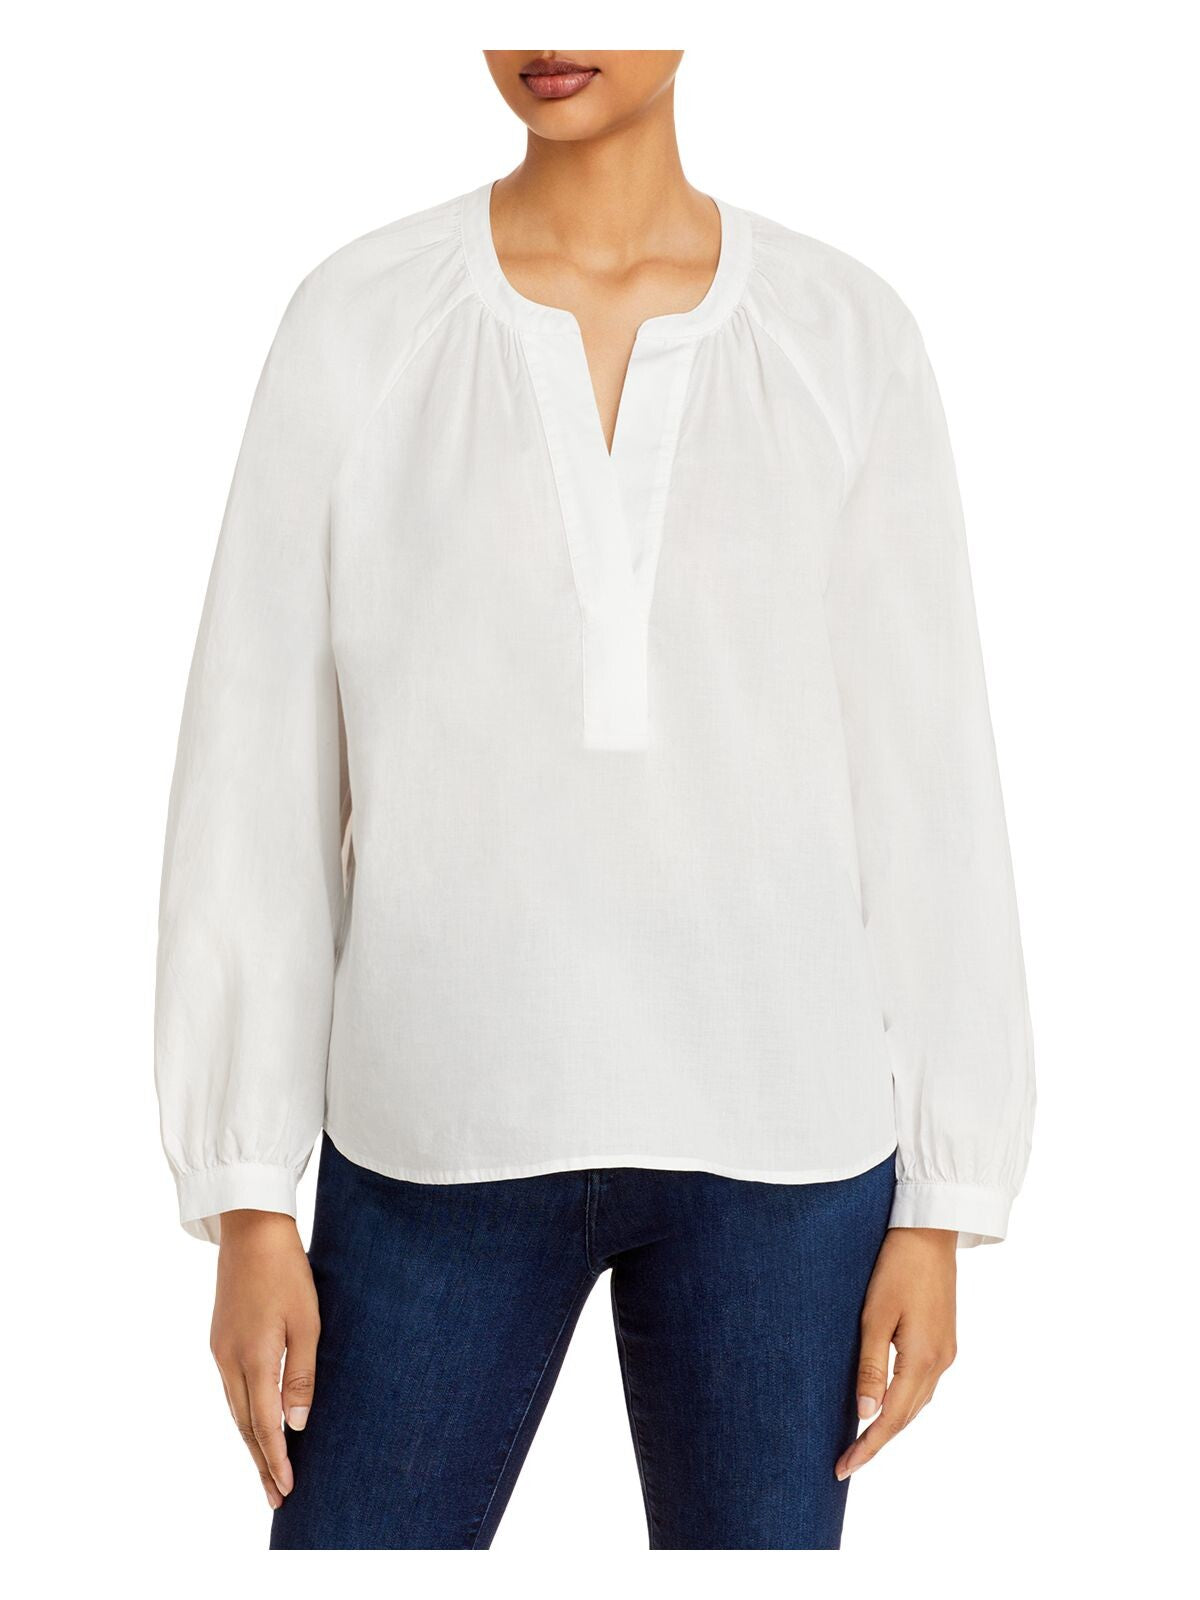 JOIE Womens White Poplin Pleated Button Pullover Cuffed Sleeve Crew Neck Top XS